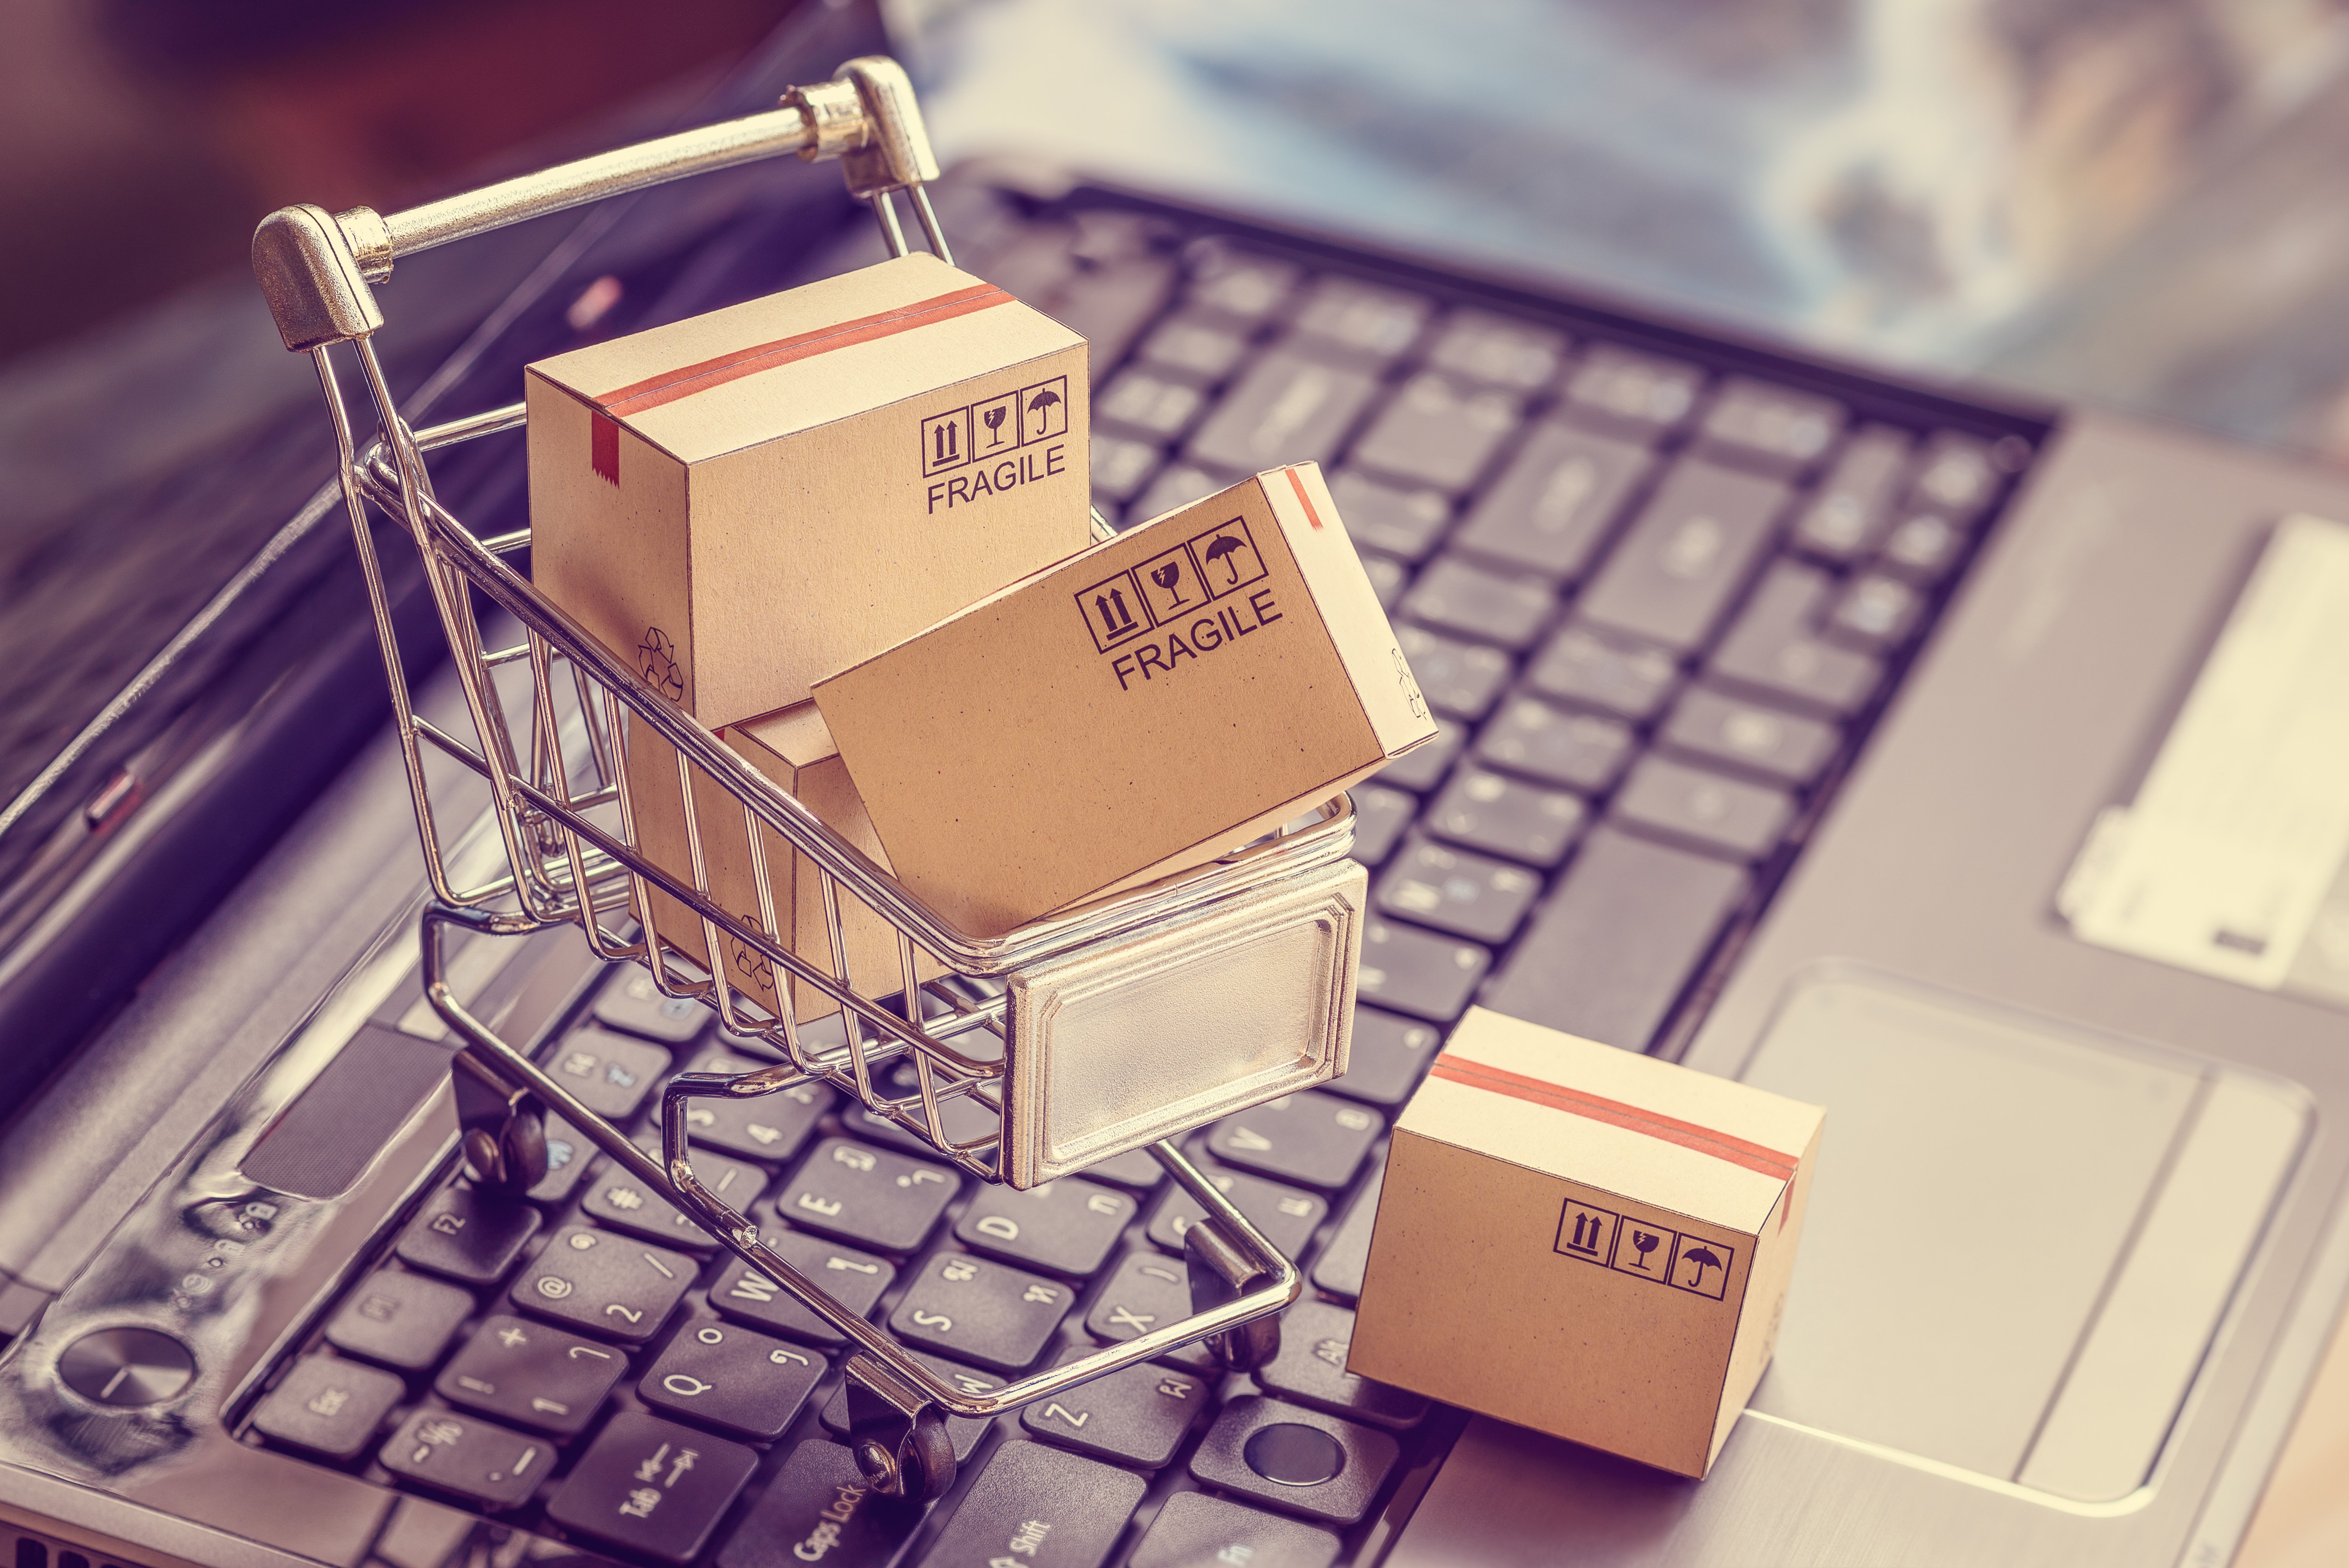 Photo of Laptop with a Shopping Cart Filled With Boxes - Smart Warehousing